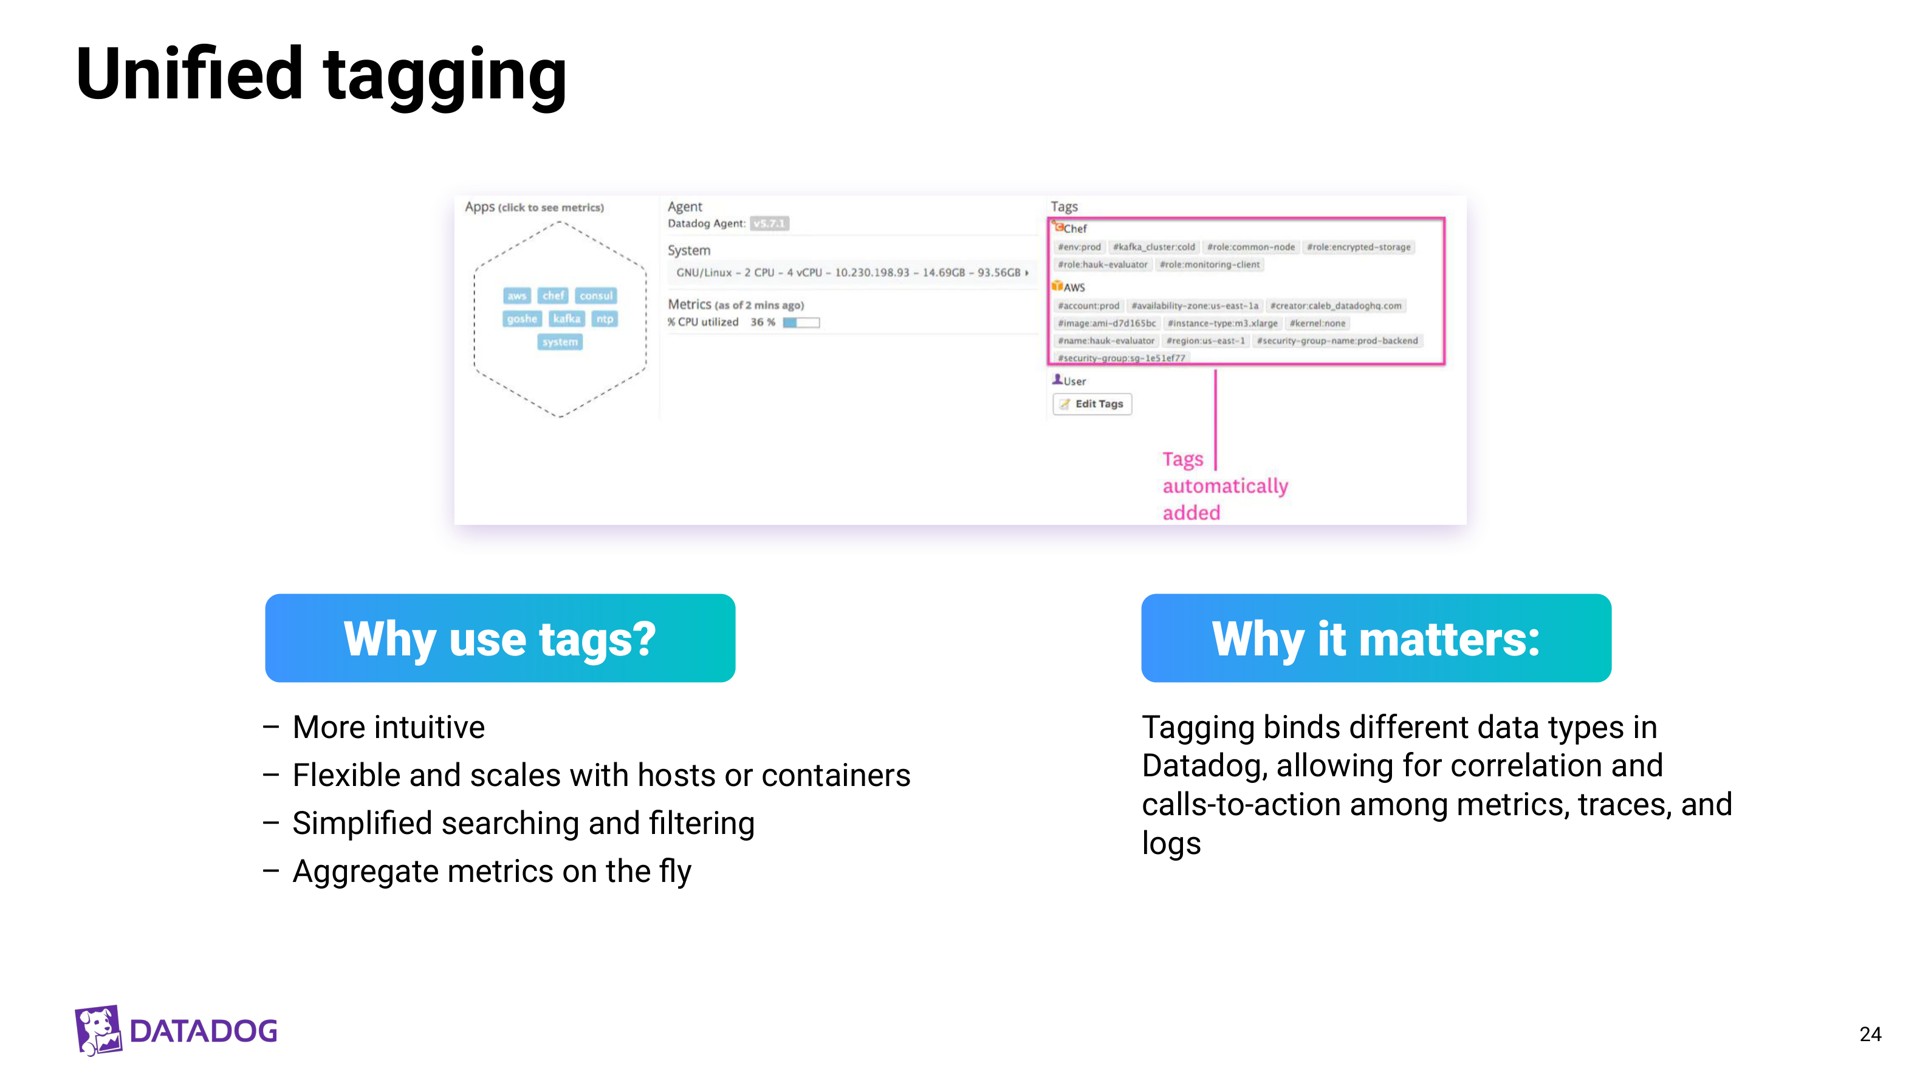 tagging unified | Datadog